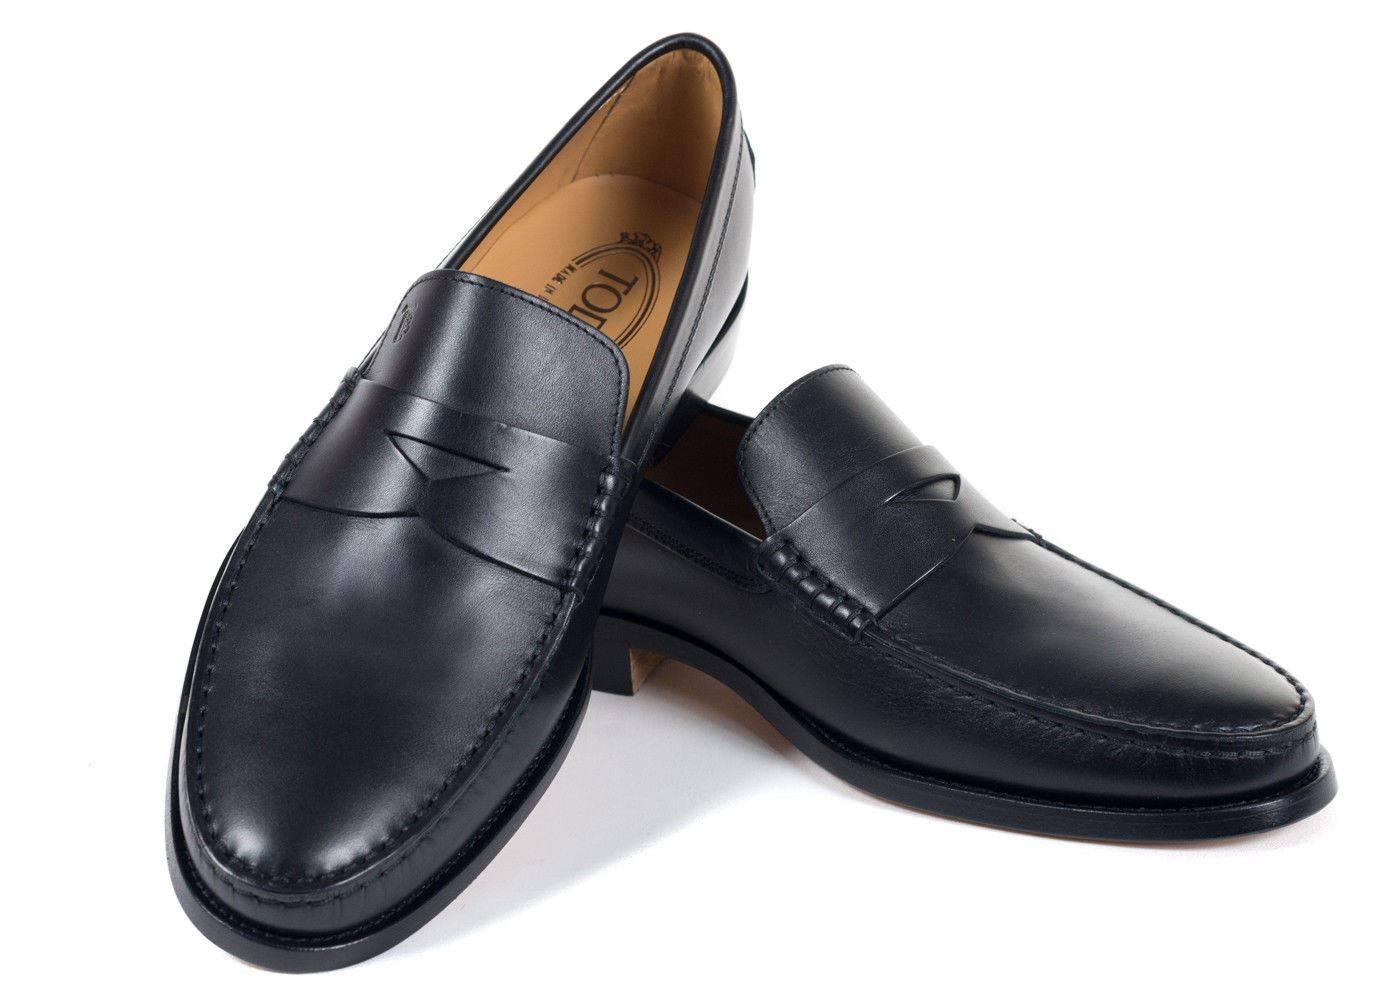 Brand New Tod's Men's Loafers
Original Box & Dust Bag Included
Retails in Stores & Online for $495
UK 9/ US 10
All Shoes are in UK Sizing

Tod's classic penny loafers crafted in black calfskin leather for an ultra smooth look to these shoes. These